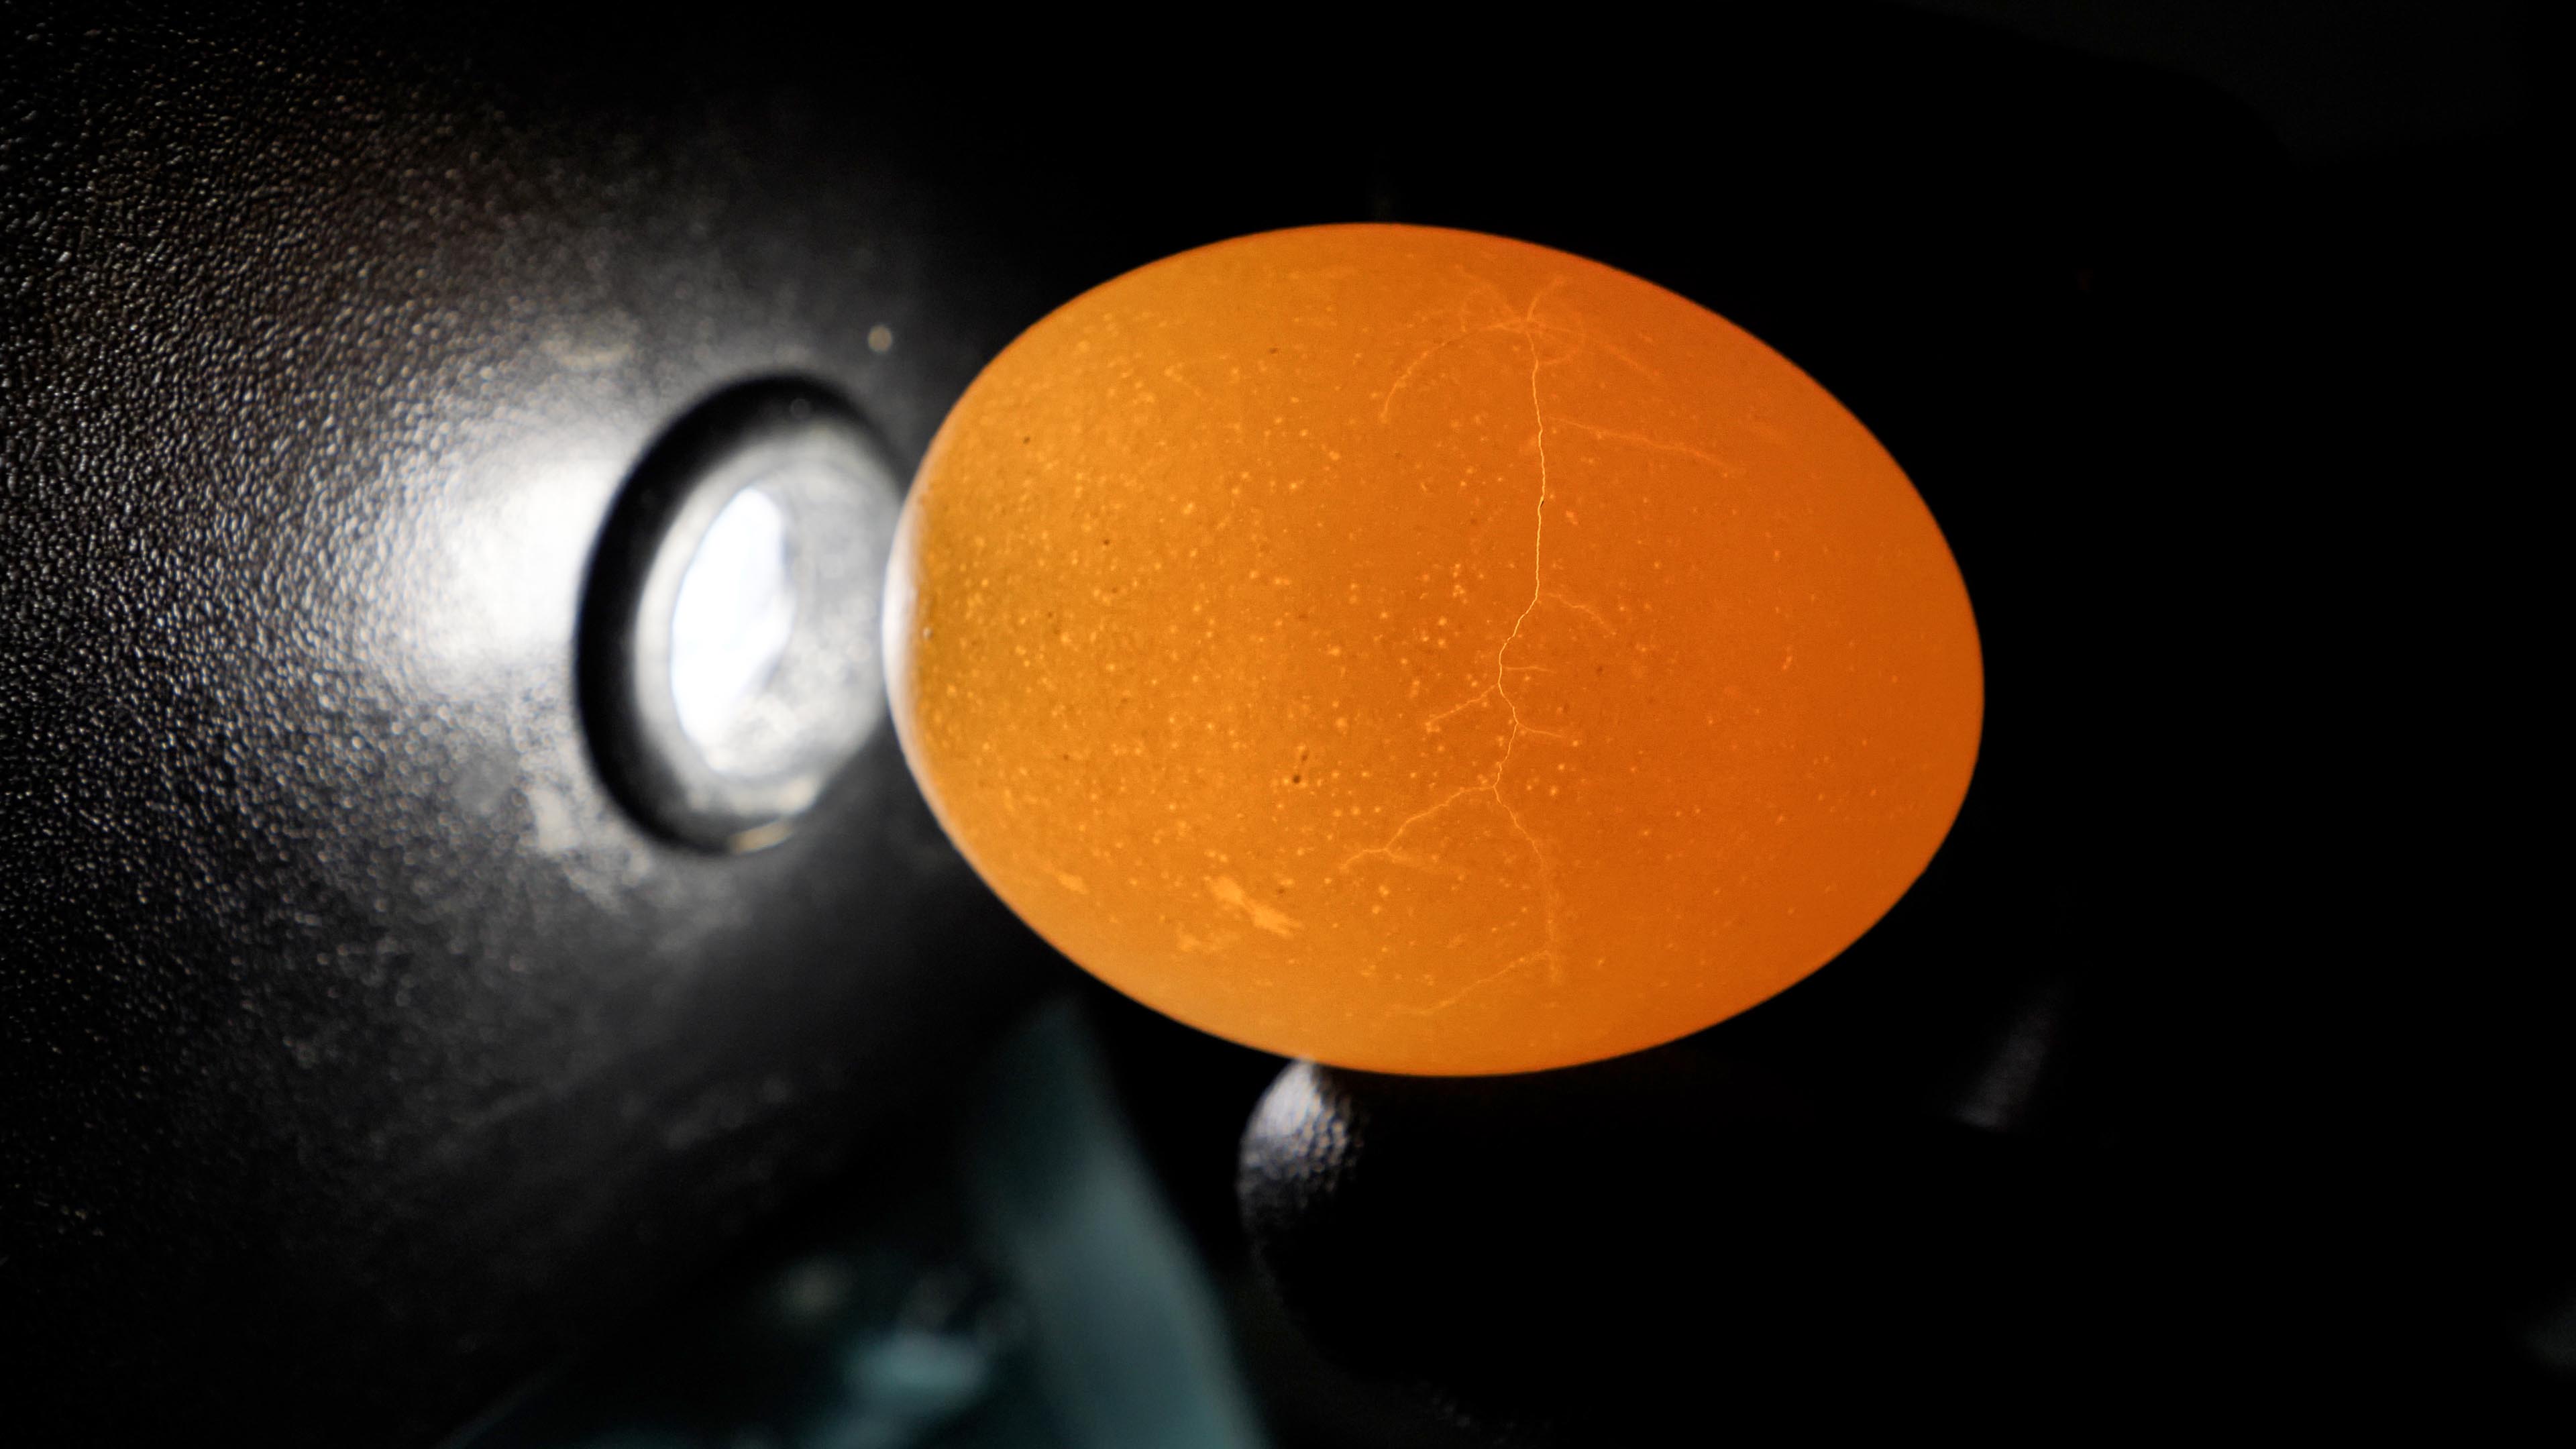 An example of the visual inspection process of eggs known as "candling"